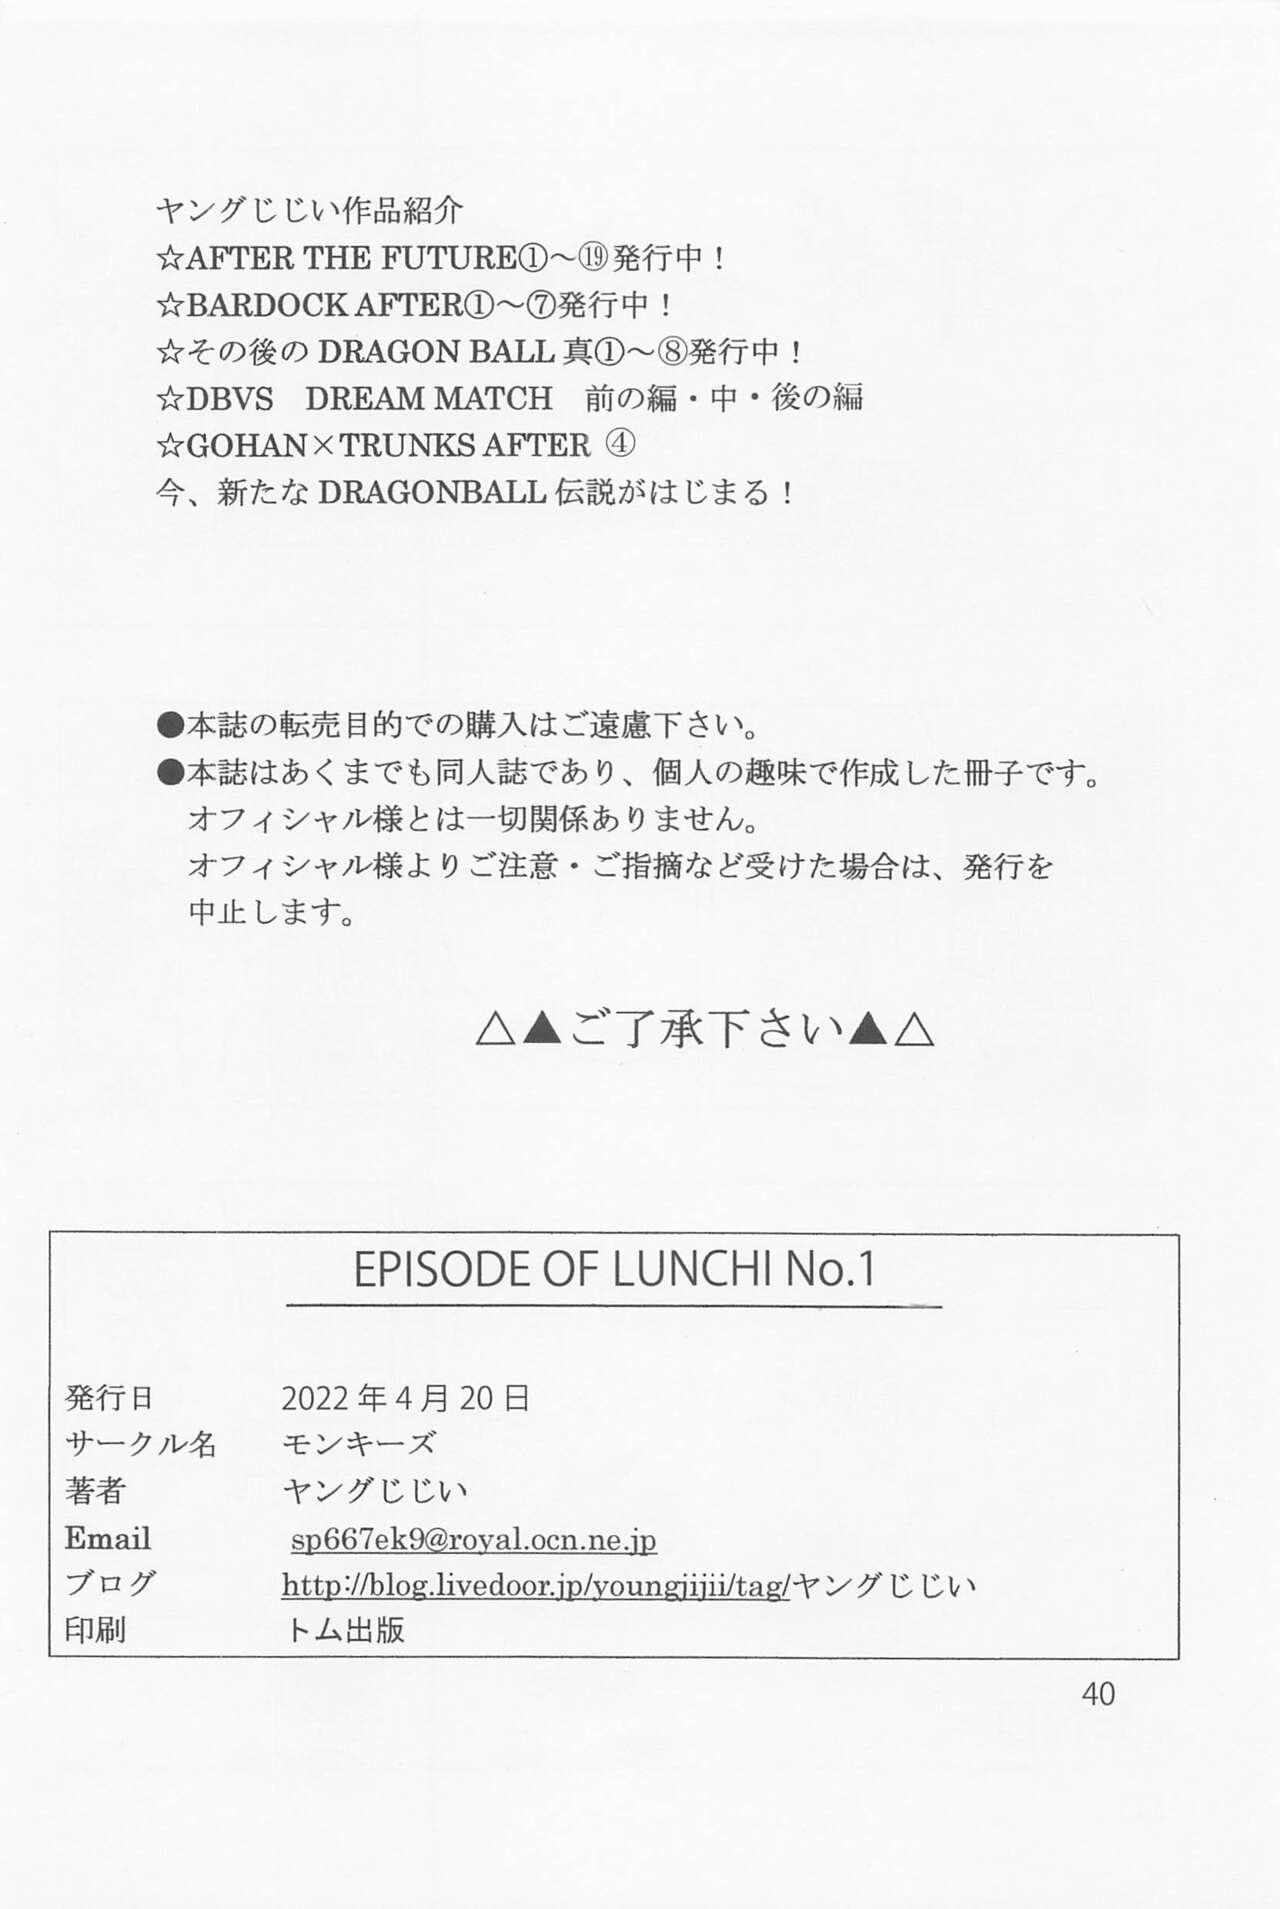 Episode of Lunch 1 40